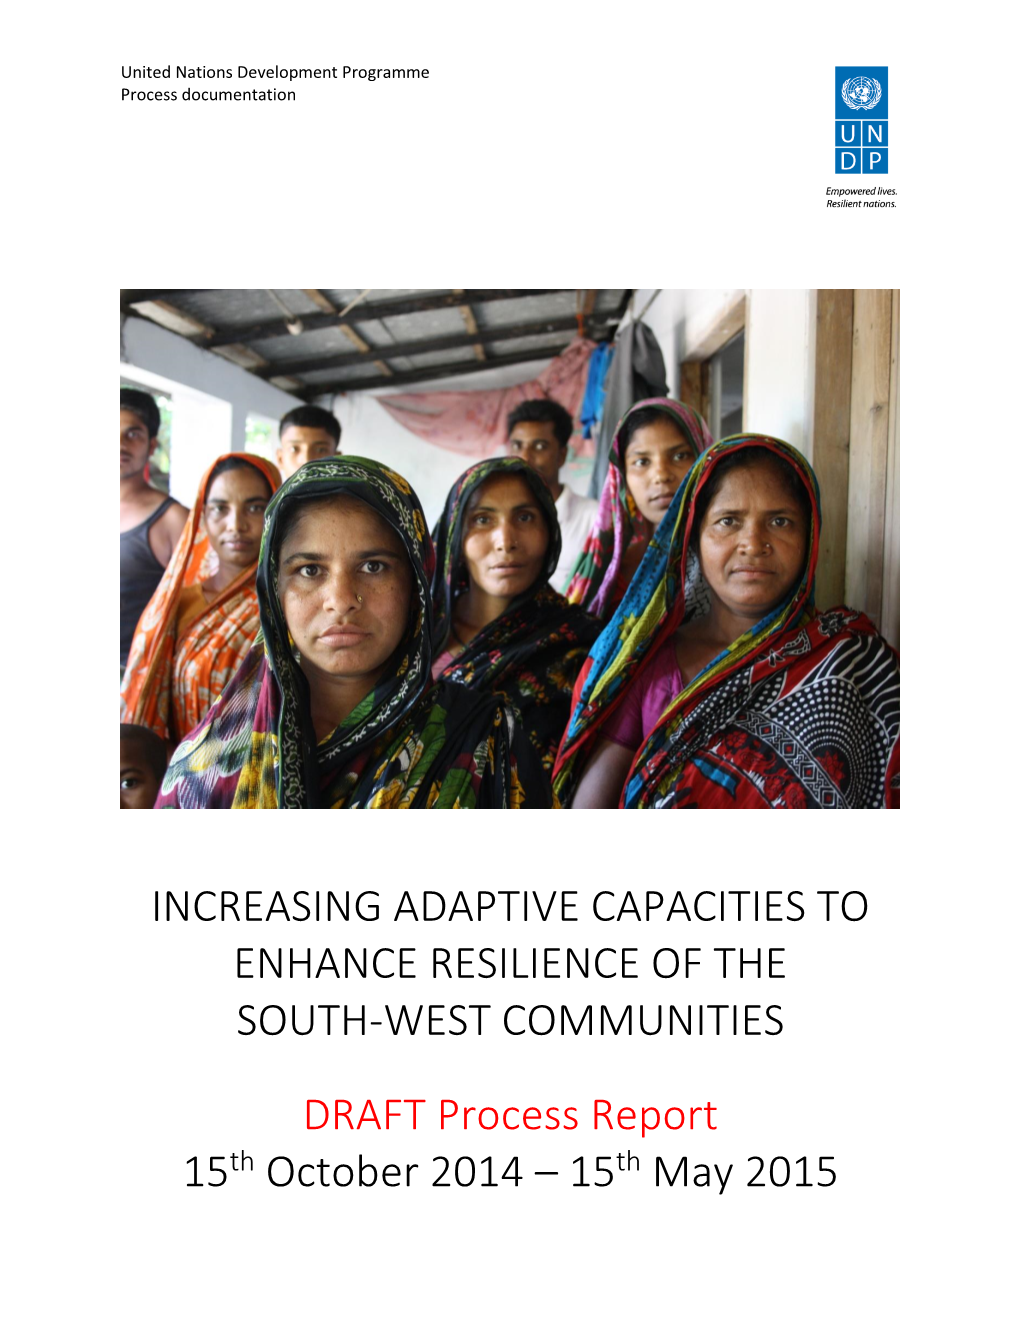 Increasing Adaptive Capacities to Enhance Resilience of the South-West Communities